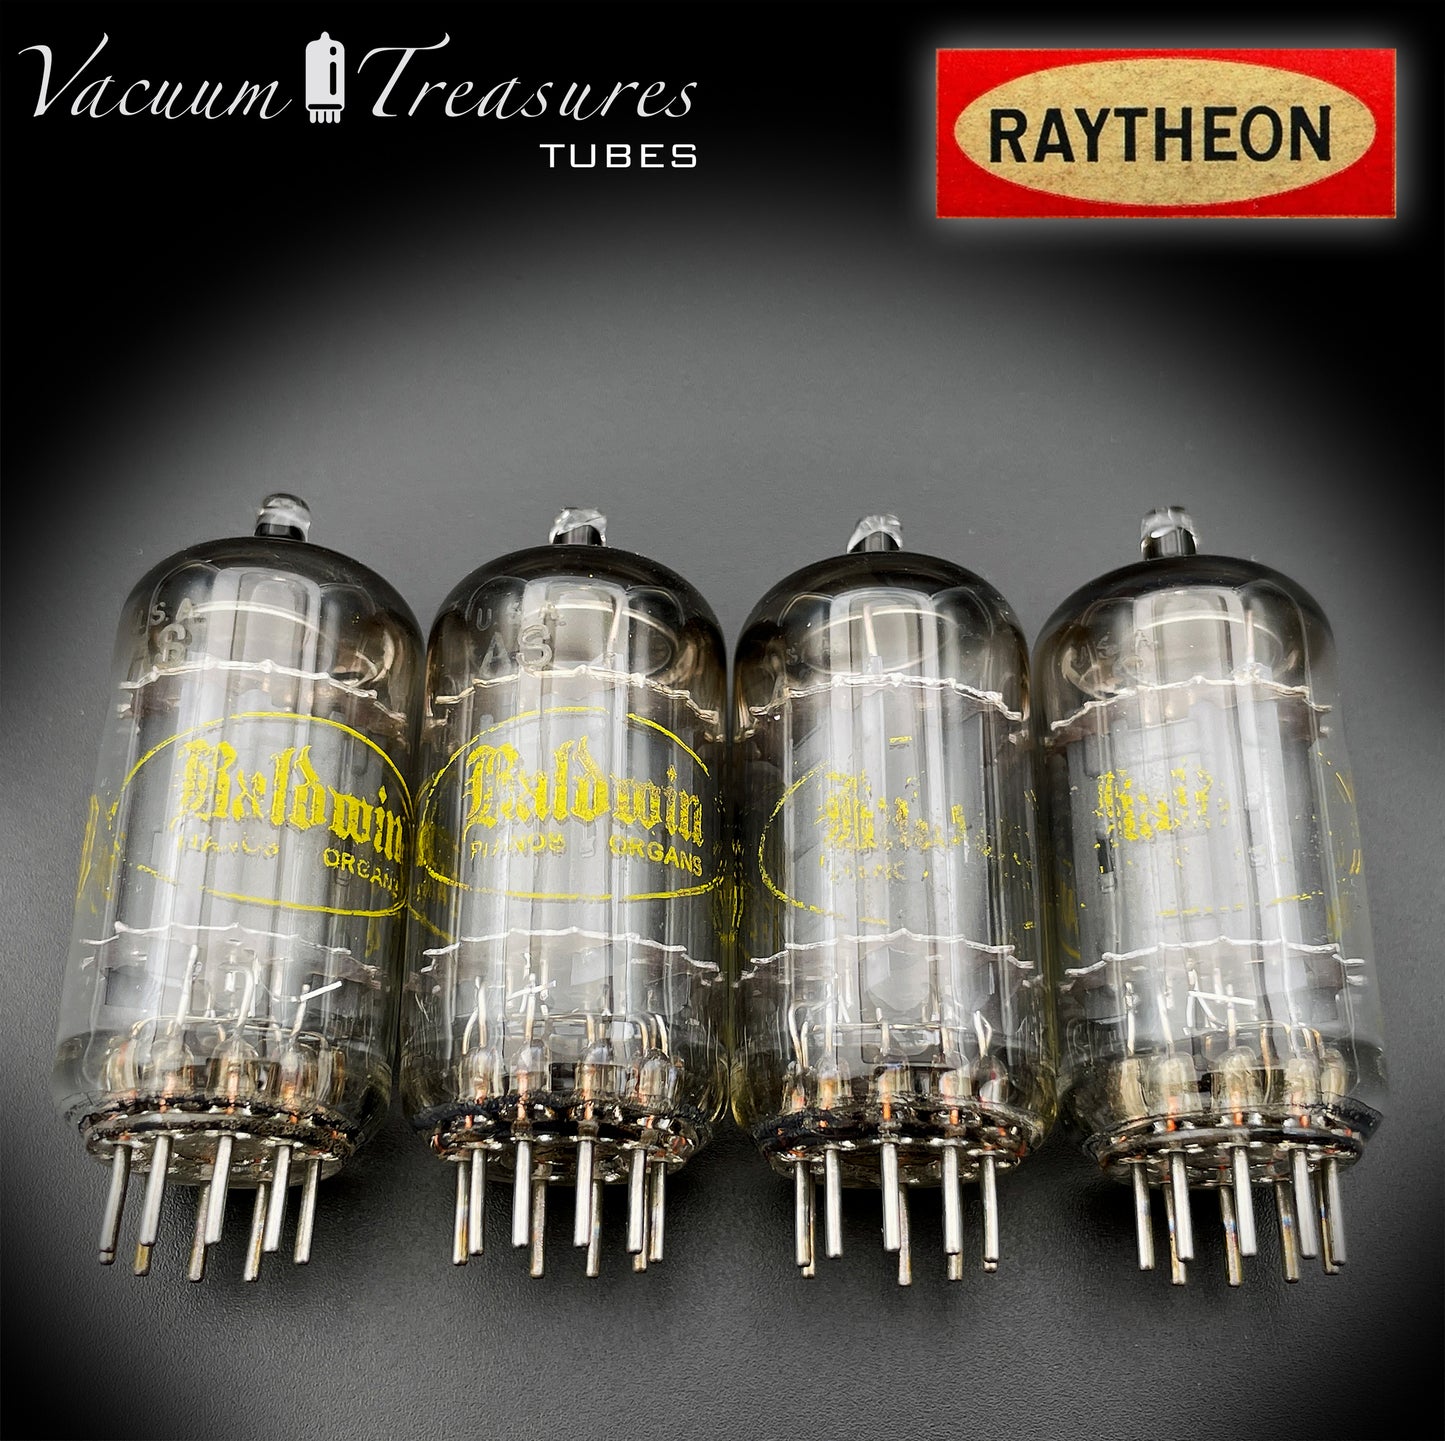 12AX7 ( ECC83 ) RAYTHEON Long Gray Plates Labeled Baldwin Organ O Getter Matched Tubes Made in USA '62